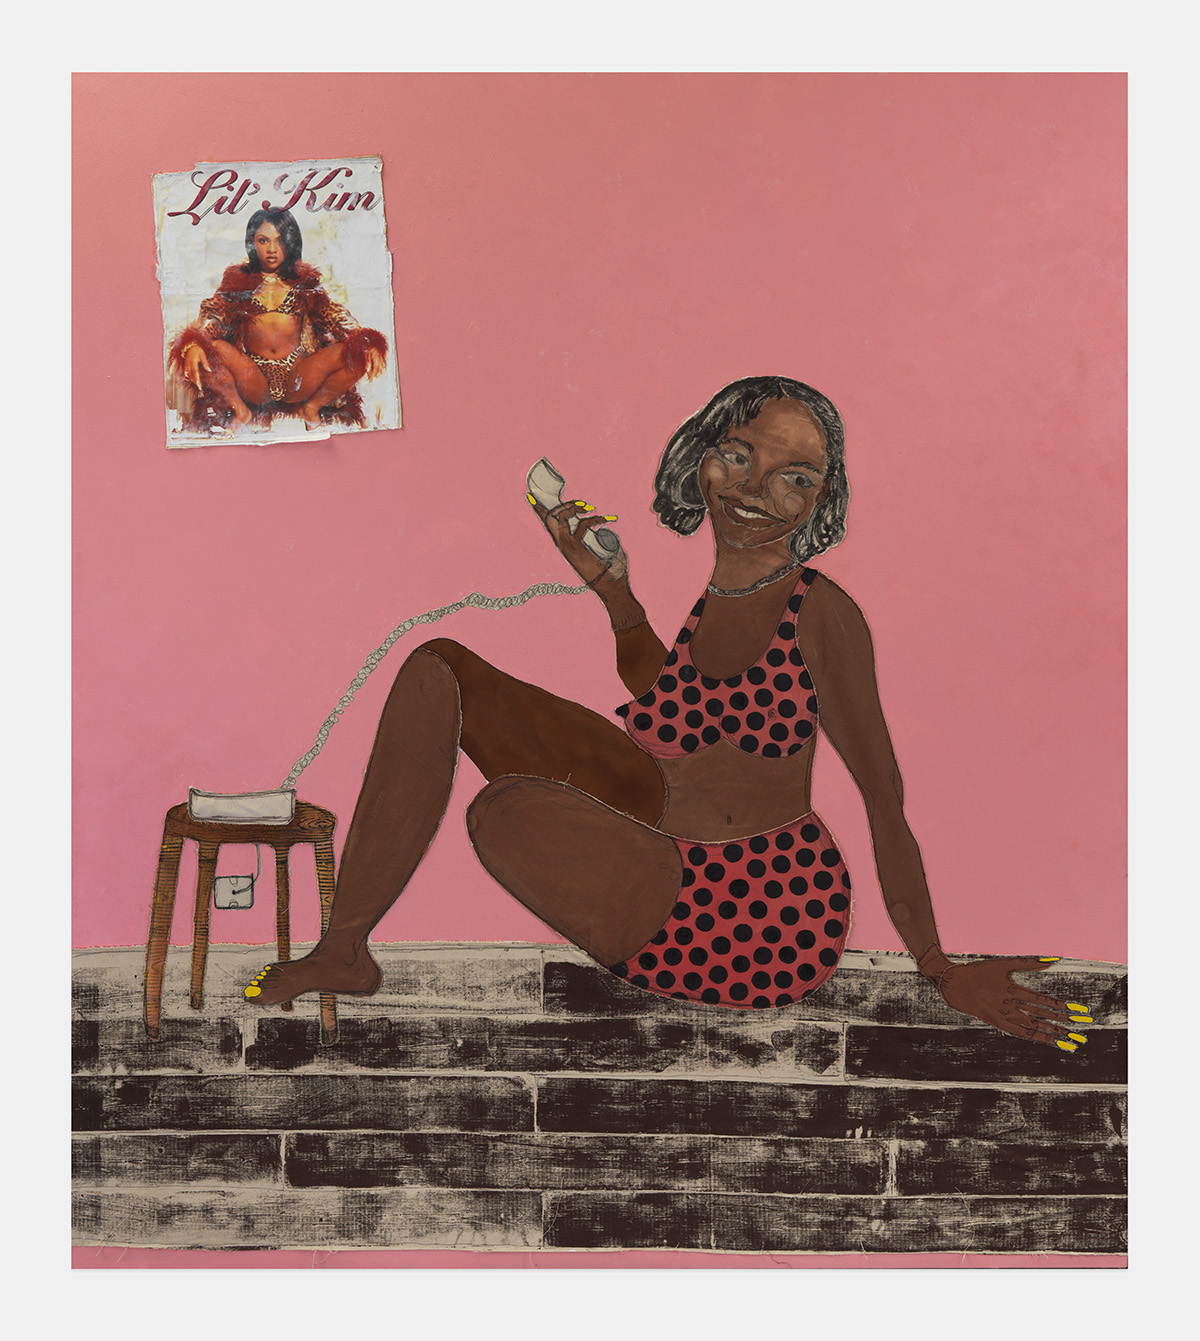 A painting of a Black woman reclining on the floor wearing a pink and black polka dotted outfit. She holds a corded phone. The pink wall in the background features a poster of Lil Kim.